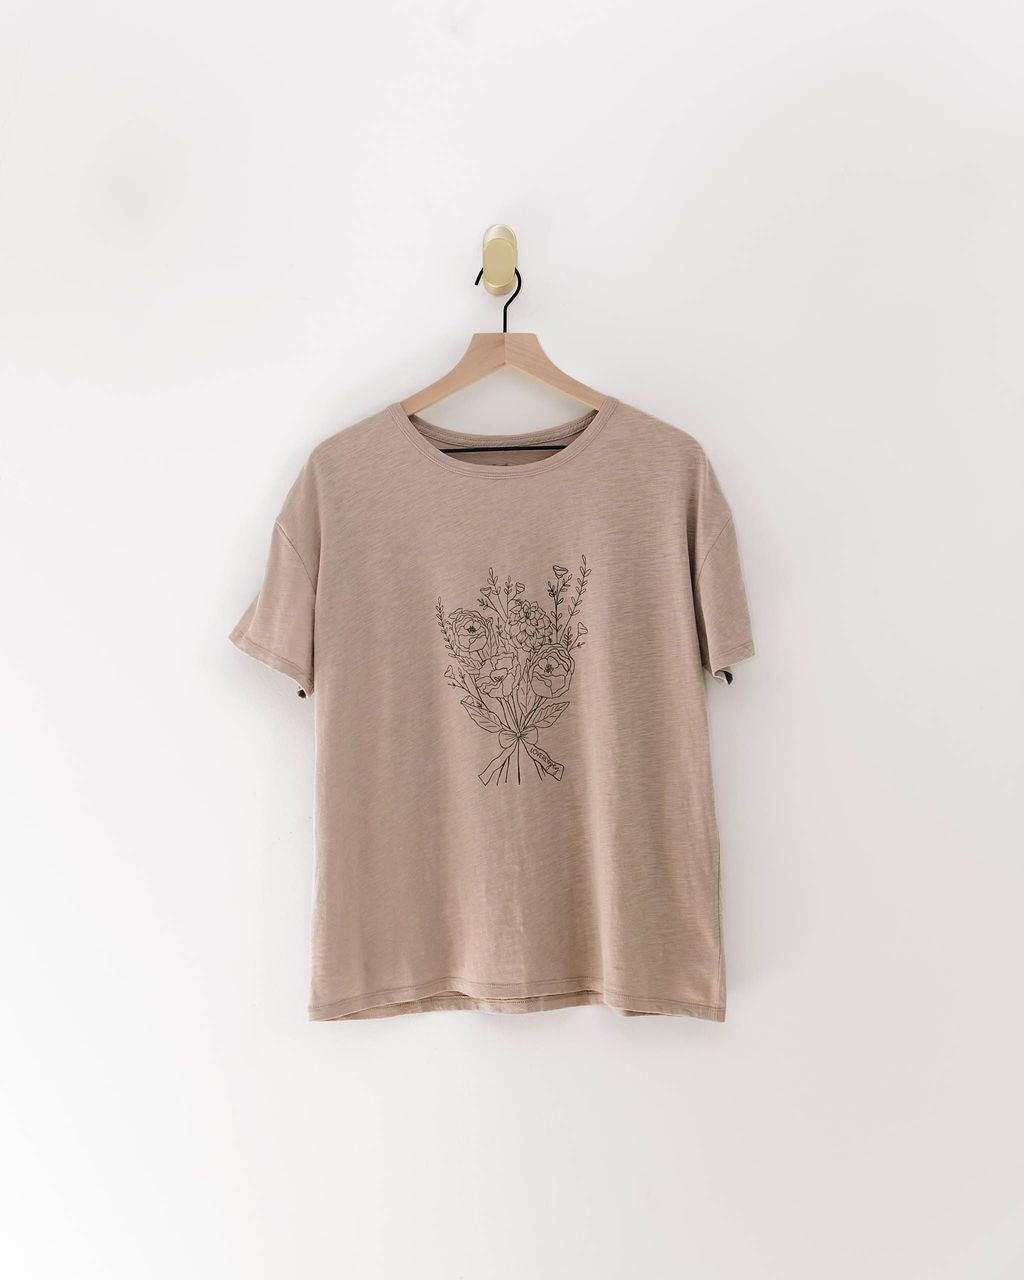 The Loverly Grey Tee - LIMITED EDITION